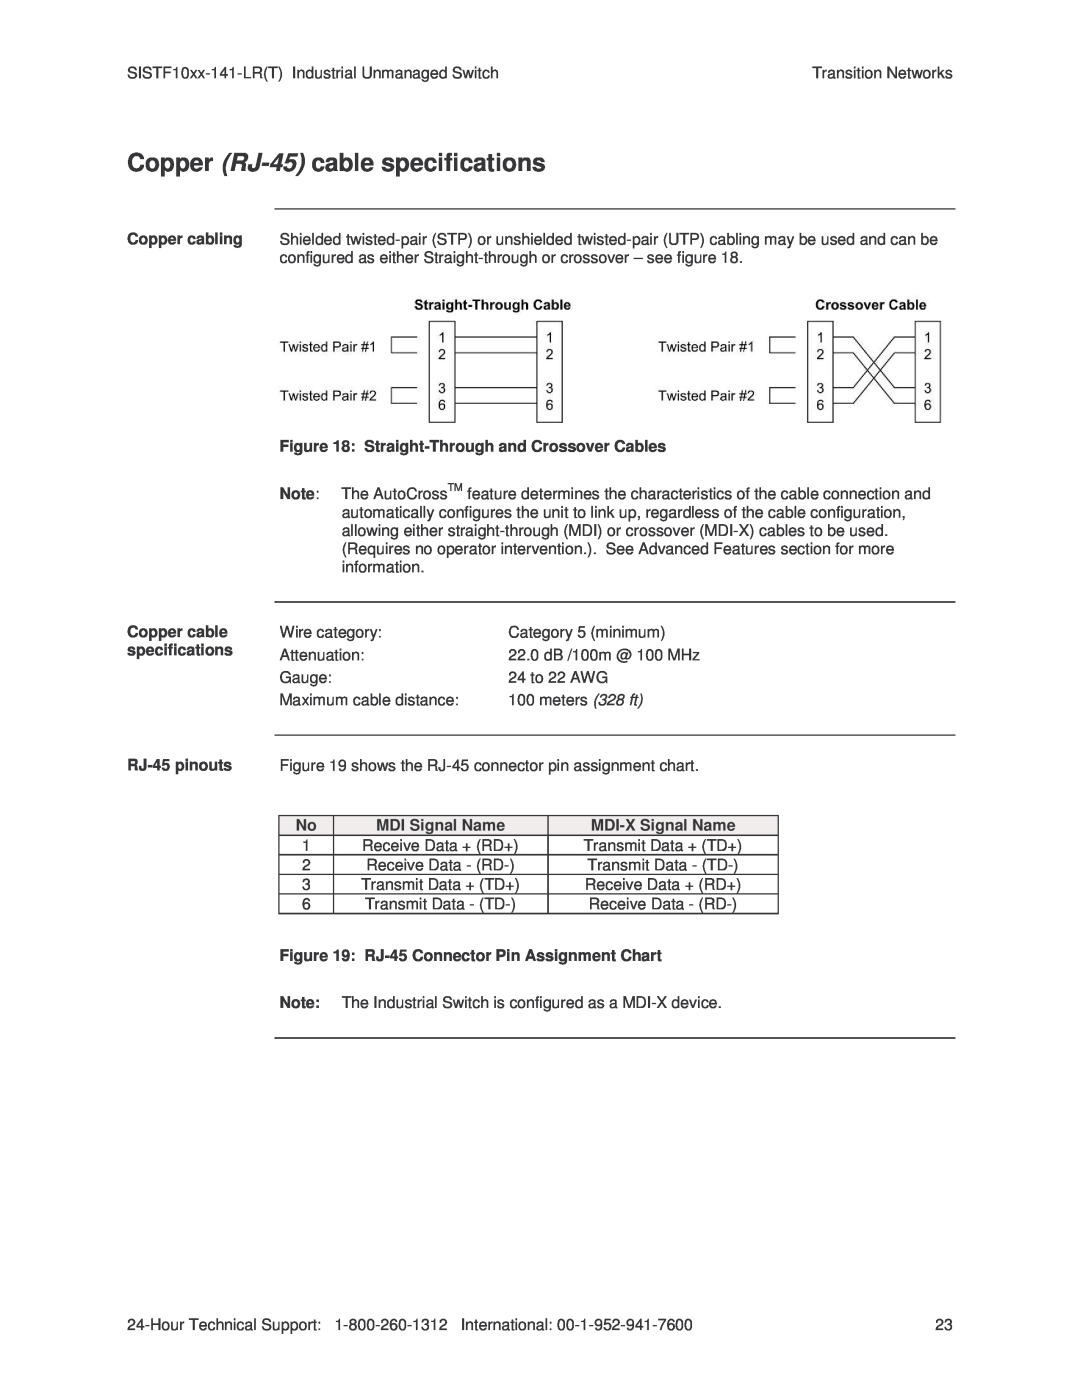 Transition Networks SISTF10xx-141-LR(T) installation manual Copper RJ-45cable specifications 